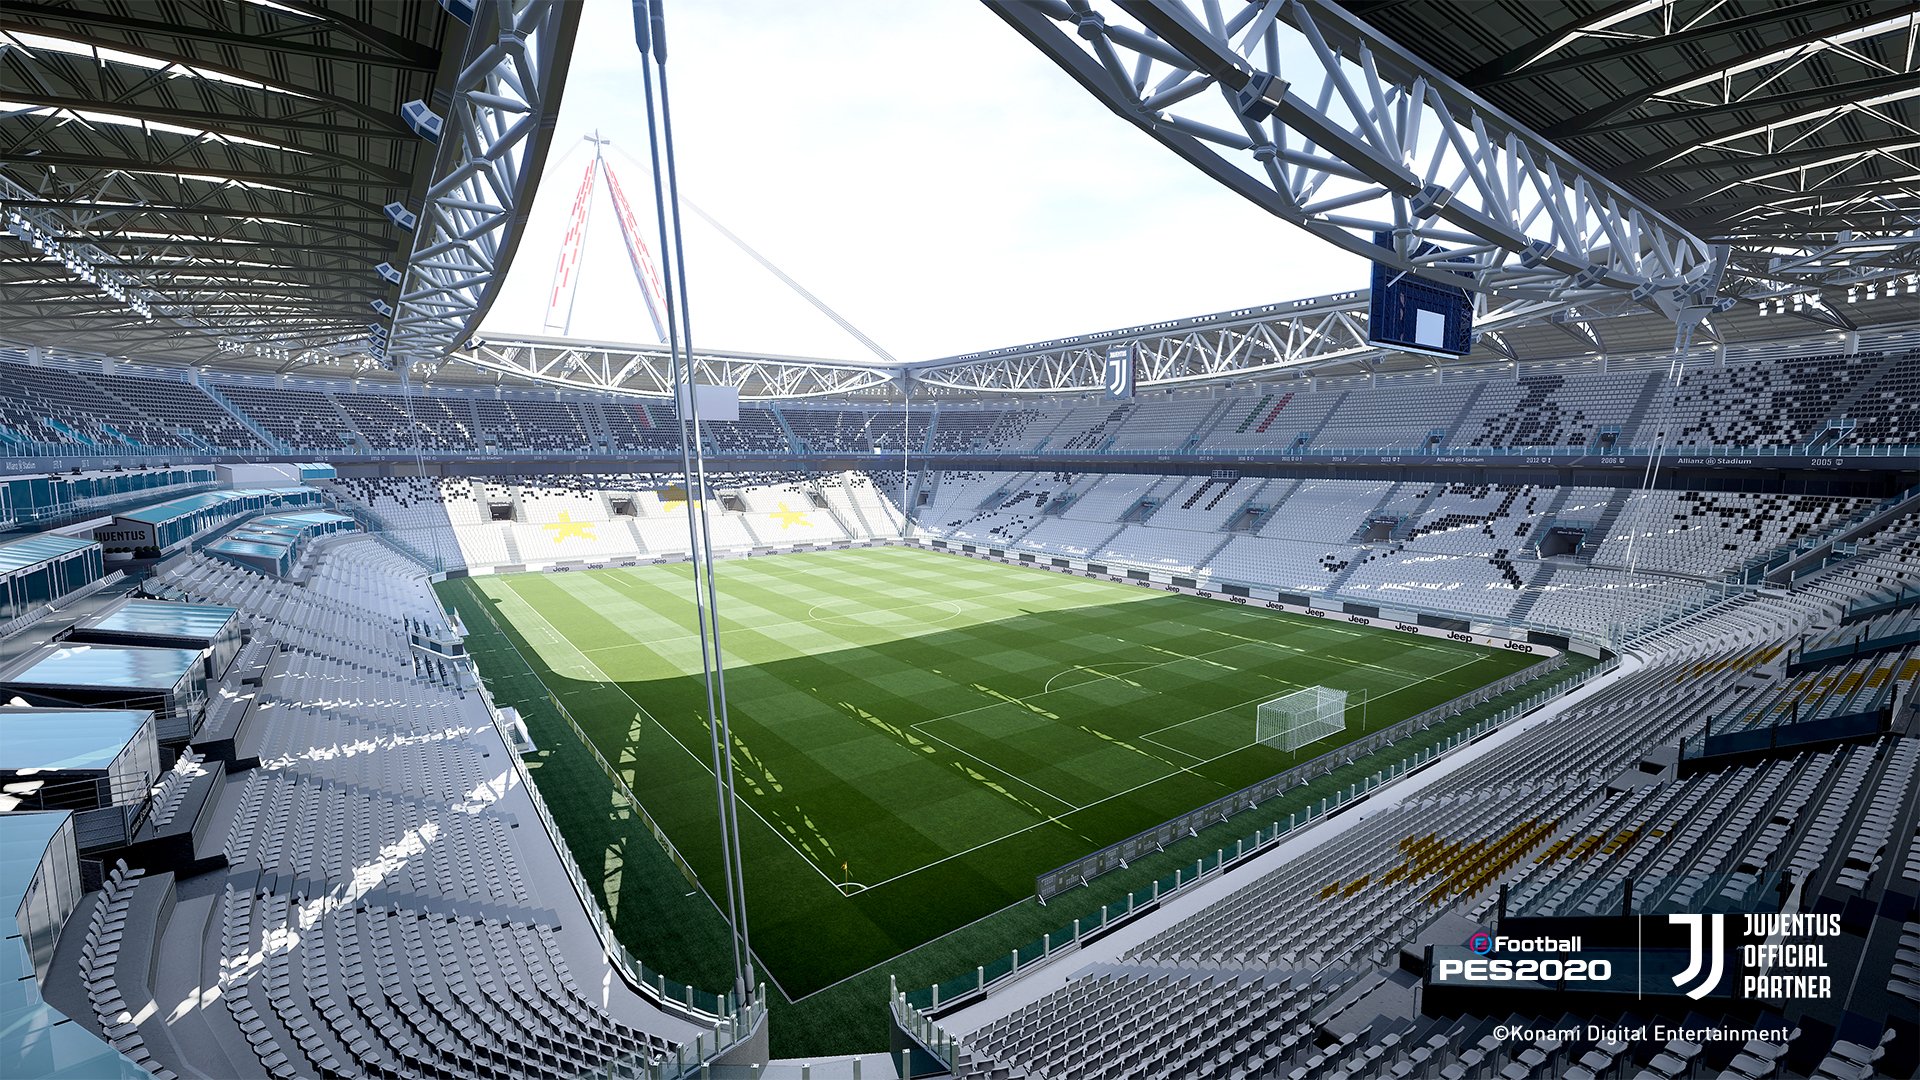 Konami Uk On Twitter The Home Of Juventus Allianz Stadium Will Also Be Exclusive To Efootballpes2020 Https T Co Ie0hutfbaz Twitter